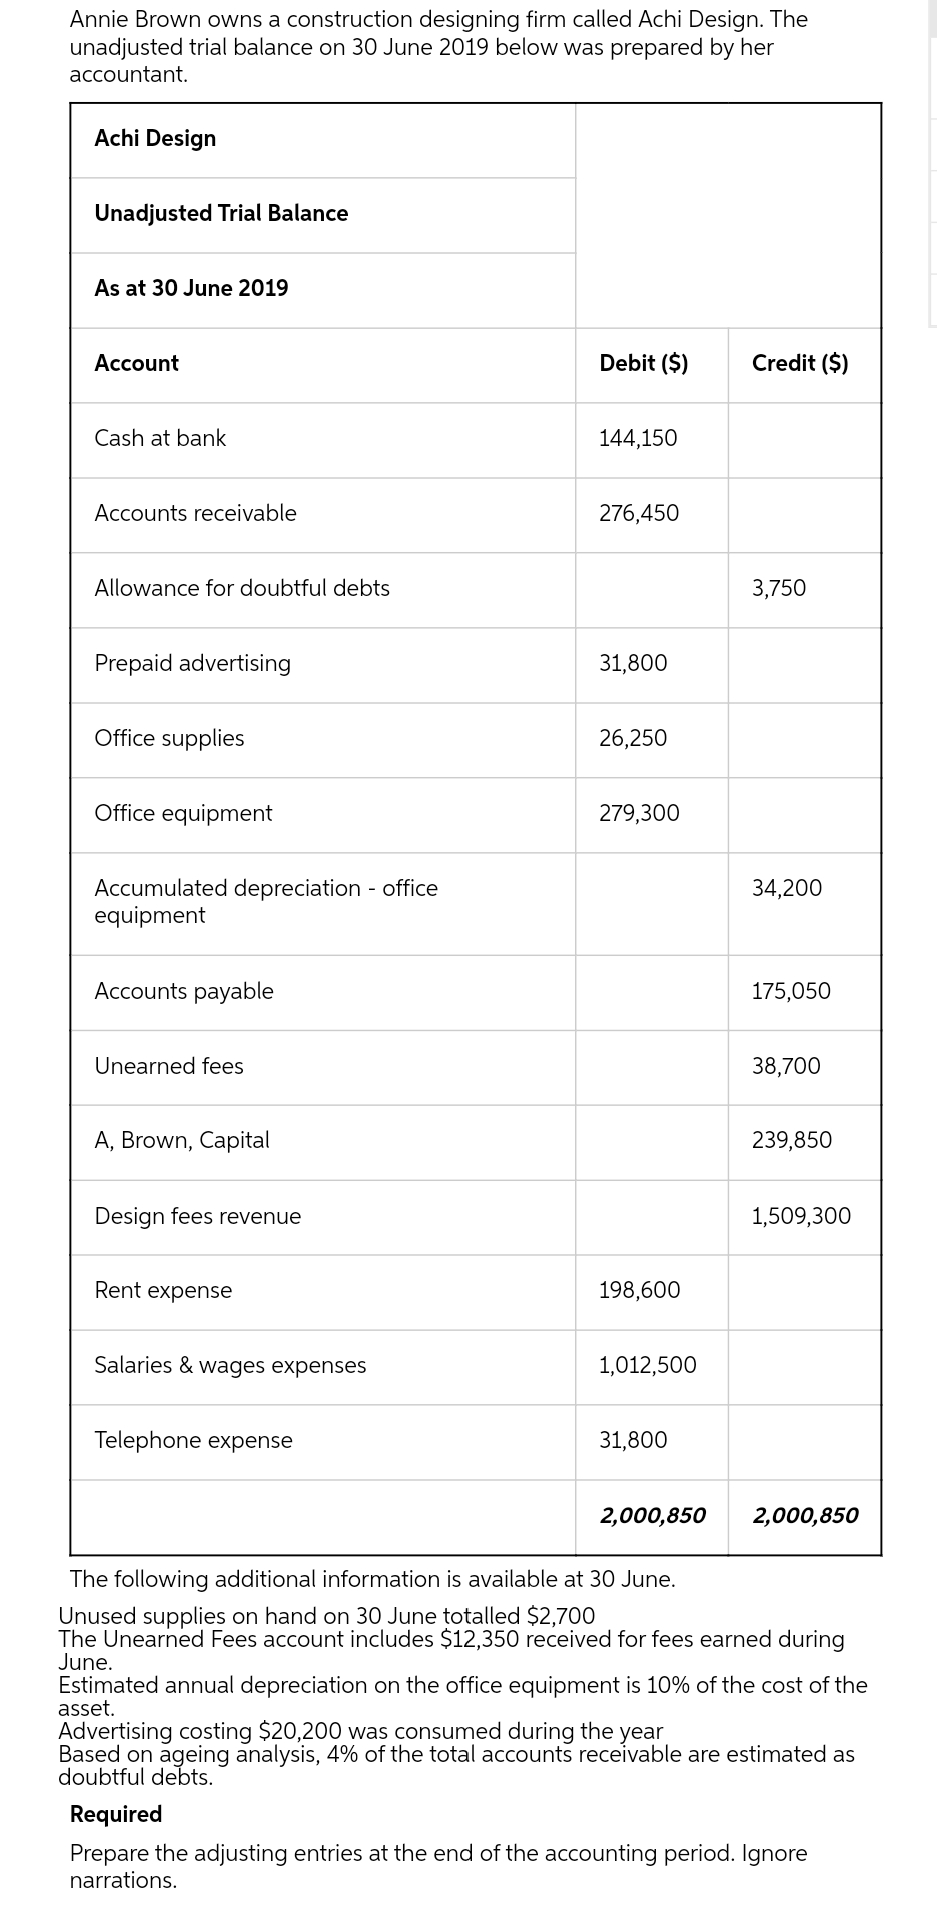 Annie Brown owns a construction designing firm called Achi Design. The
unadjusted trial balance on 30 June 2019 below was prepared by her
accountant.
Achi Design
Unadjusted Trial Balance
As at 30 June 2019
Account
Cash at bank
Accounts receivable
Allowance for doubtful debts
Prepaid advertising
Office supplies
Office equipment
Accumulated depreciation - office
equipment
Accounts payable
Unearned fees
A, Brown, Capital
Design fees revenue
Rent expense
Salaries & wages expenses
Telephone expense
Debit ($)
144,150
276,450
31,800
26,250
279,300
198,600
1,012,500
31,800
2,000,850
Credit ($)
3,750
34,200
175,050
38,700
239,850
1,509,300
2,000,850
The following additional information is available at 30 June.
Unused supplies on hand on 30 June totalled $2,700
The Unearned Fees account includes $12,350 received for fees earned during
June.
Estimated annual depreciation on the office equipment is 10% of the cost of the
asset.
Advertising costing $20,200 was consumed during the year
Based on ageing analysis, 4% of the total accounts receivable are estimated as
doubtful debts.
Required
Prepare the adjusting entries at the end of the accounting period. Ignore
narrations.